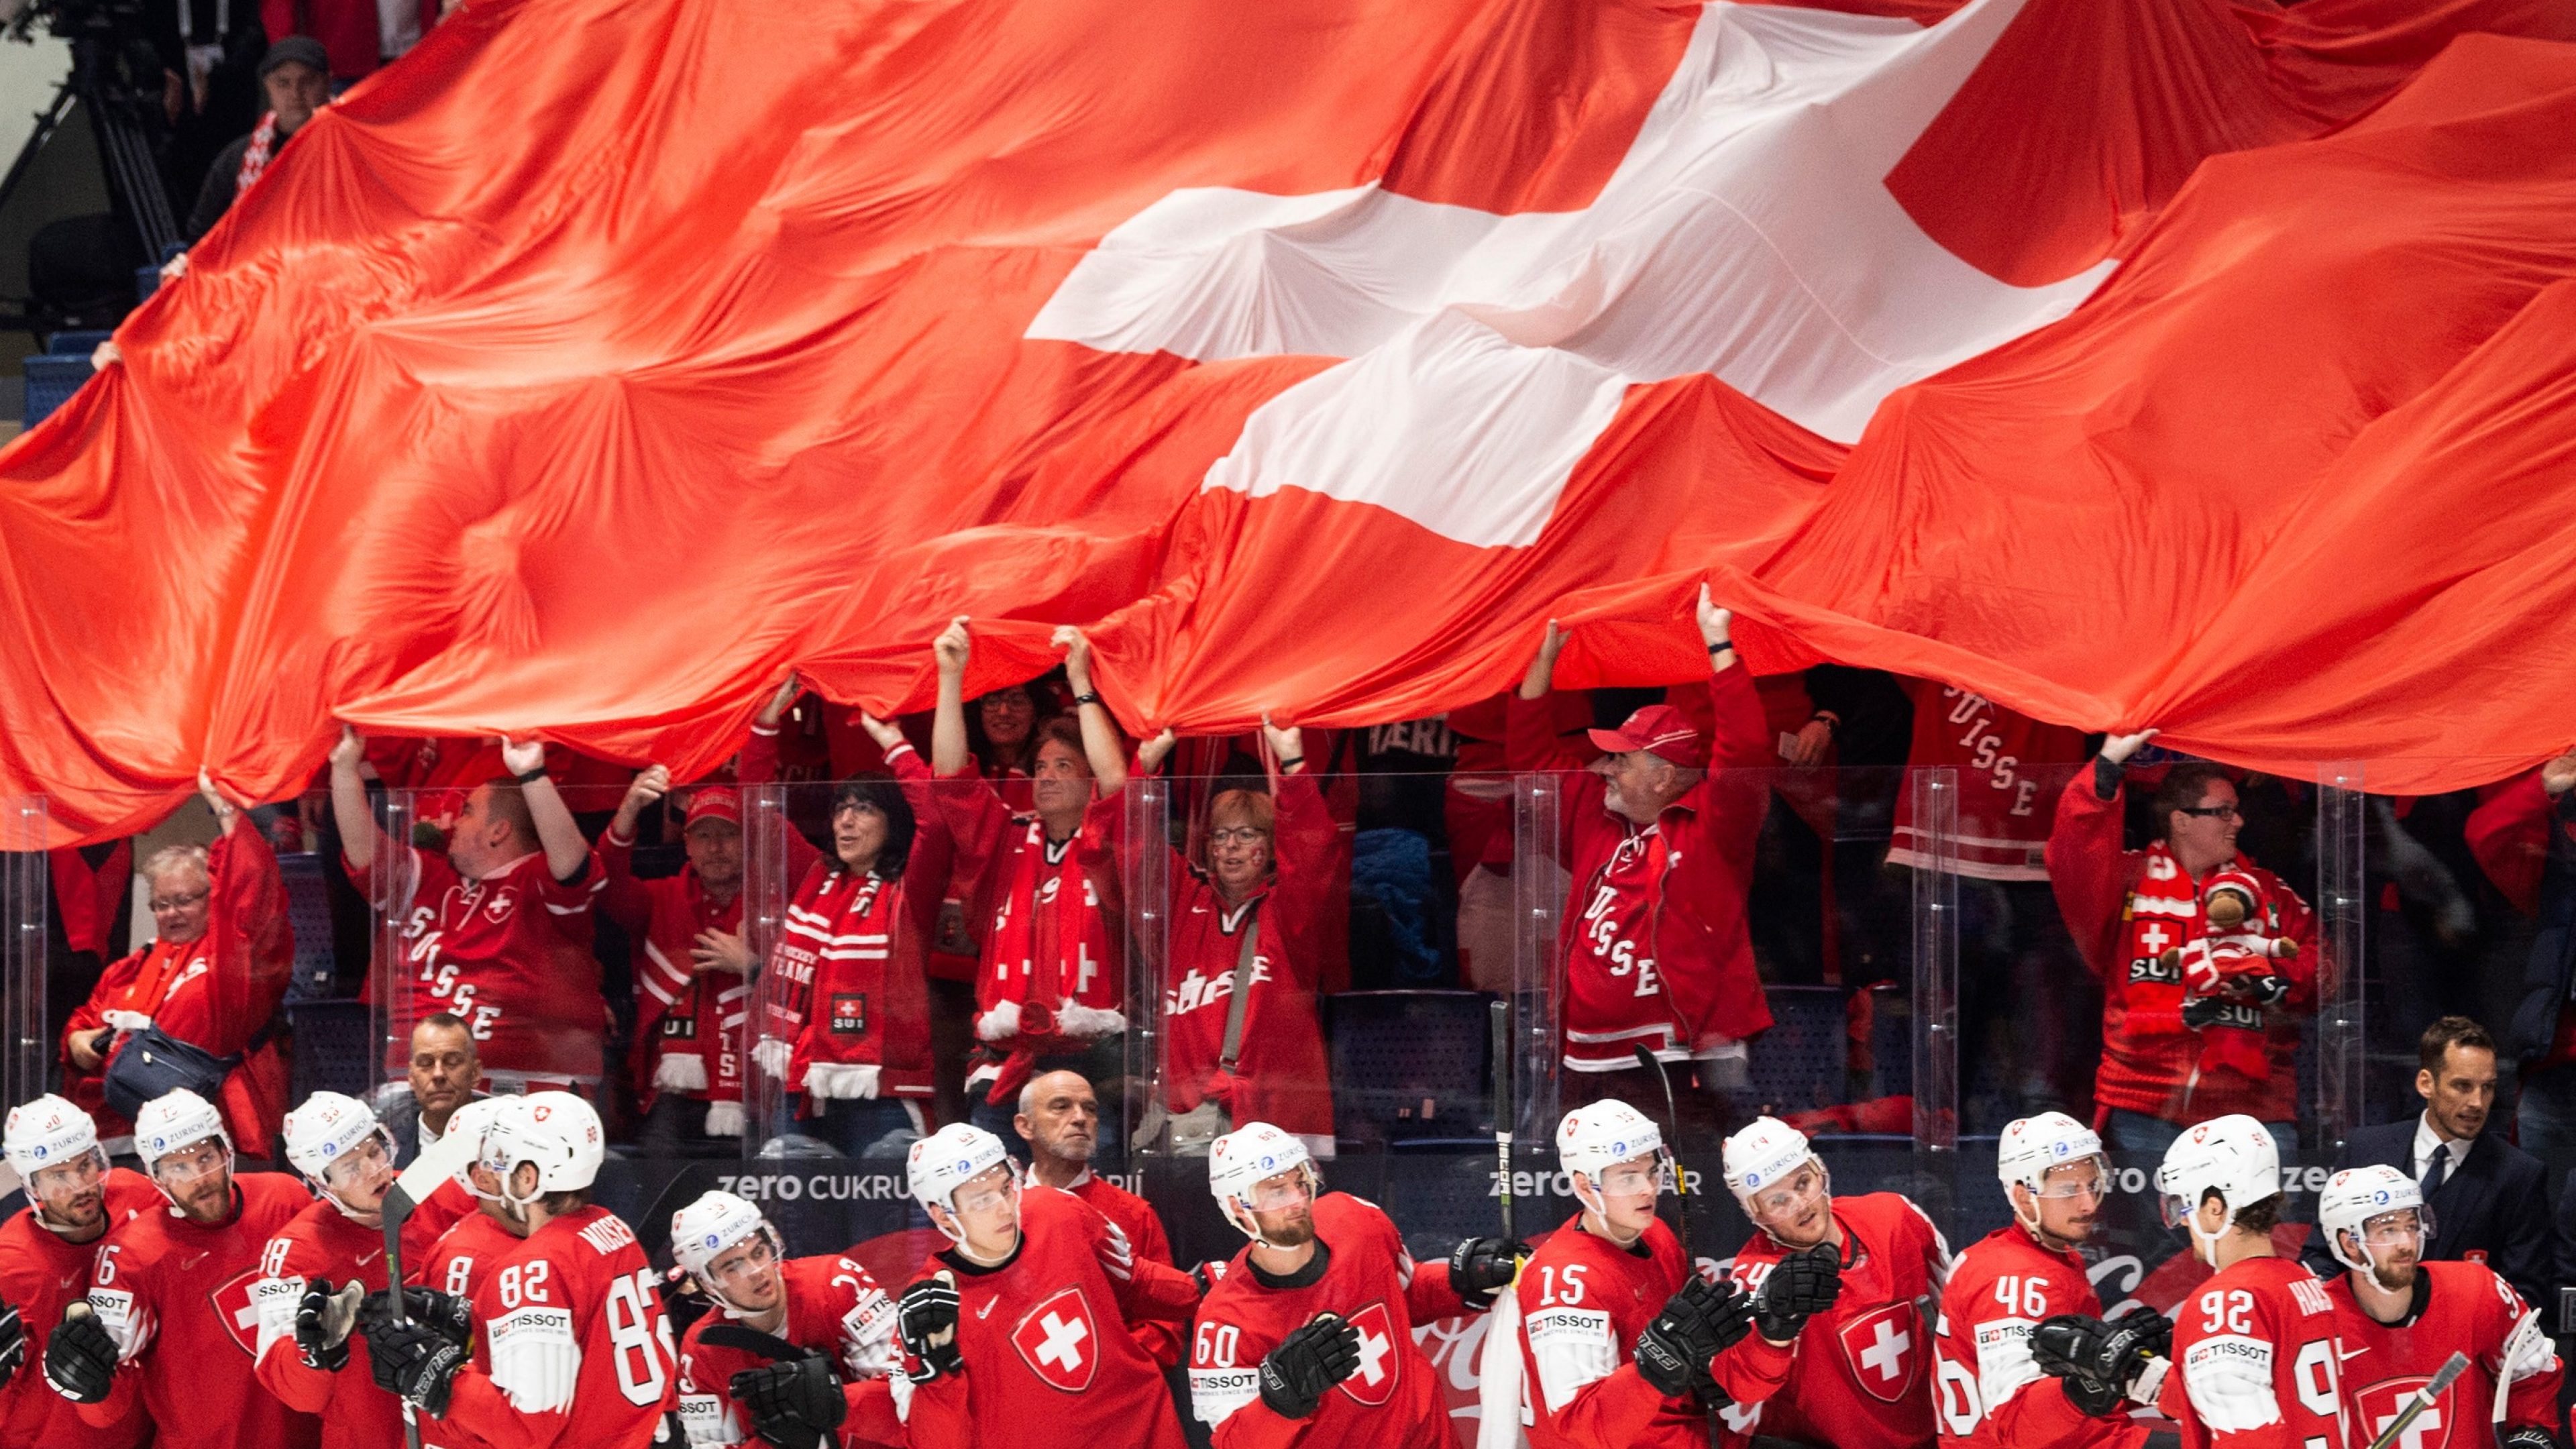 Switzerland's team and fans celebrate after scoring 5:0 during the game between Switzerland and Italy, at the IIHF 2019 World Ice Hockey Championships, at the Ondrej Nepela Arena in Bratislava, Slovakia, on Saturday, May 11, 2019. (KEYSTONE/Melanie Duchene)